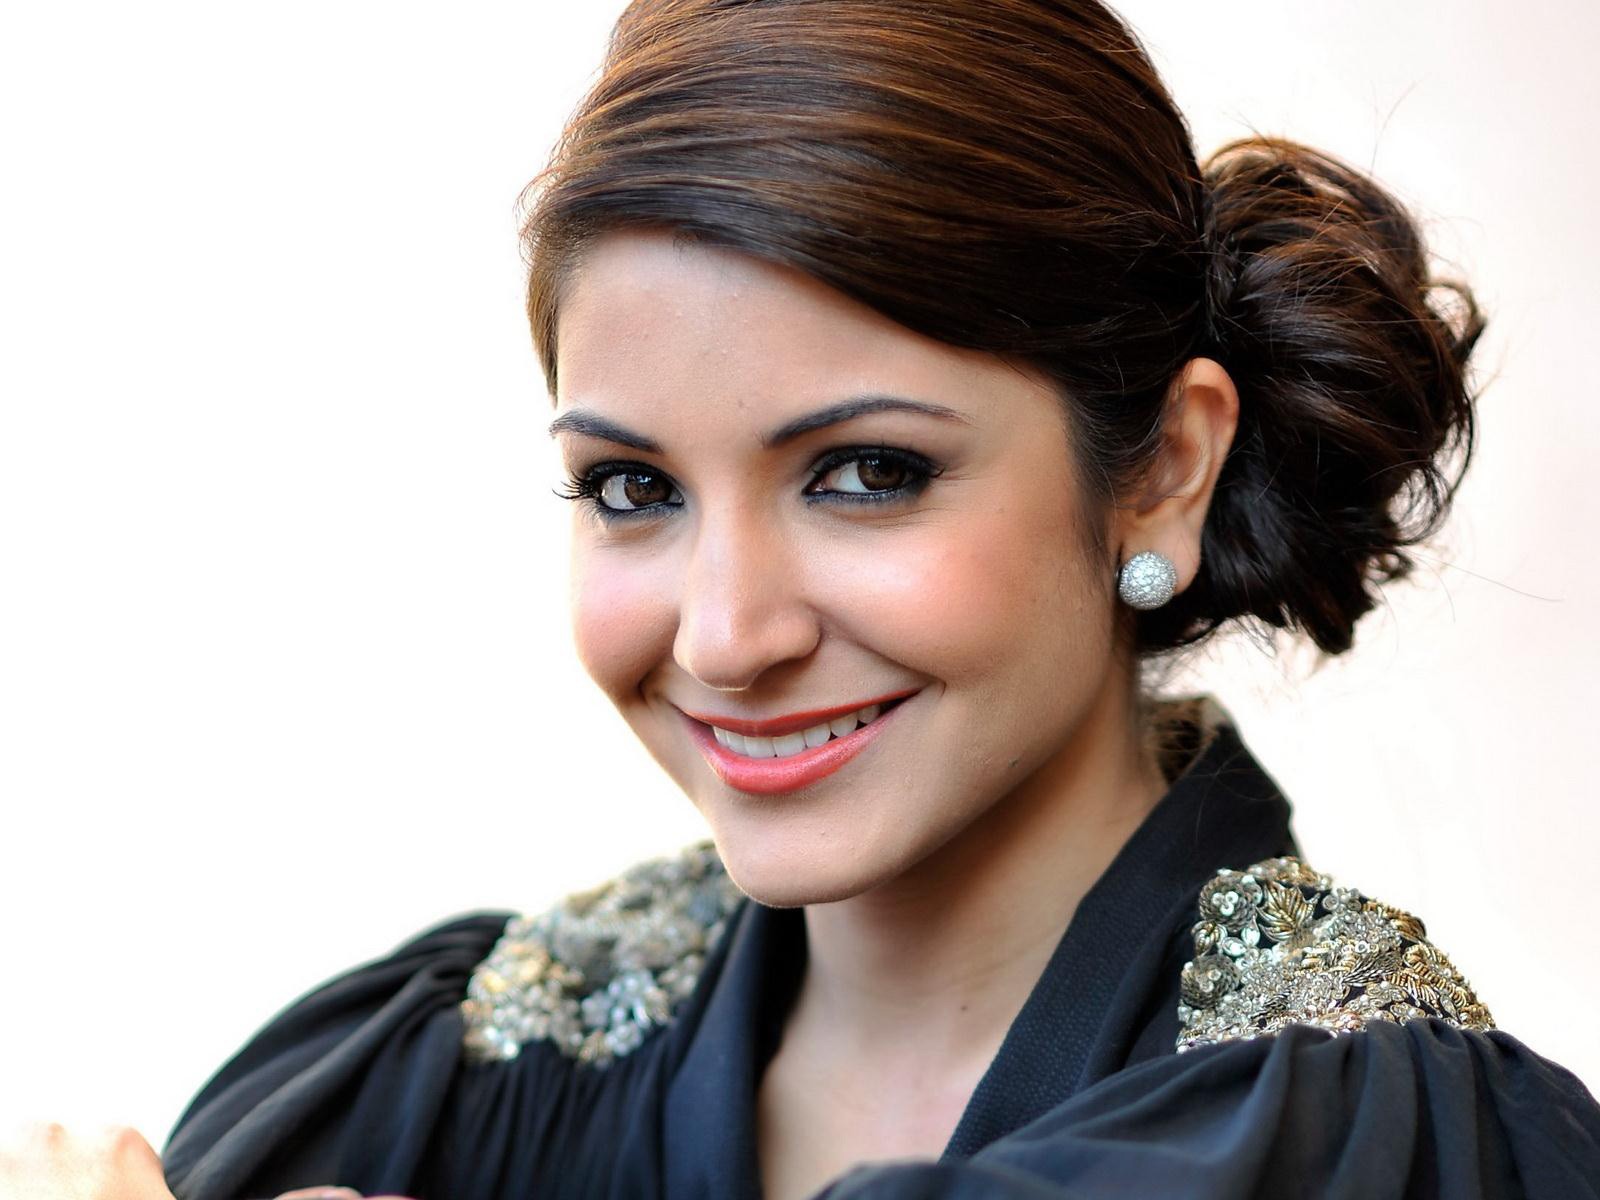 Never faced nepotism in film industry: Anushka Sharma